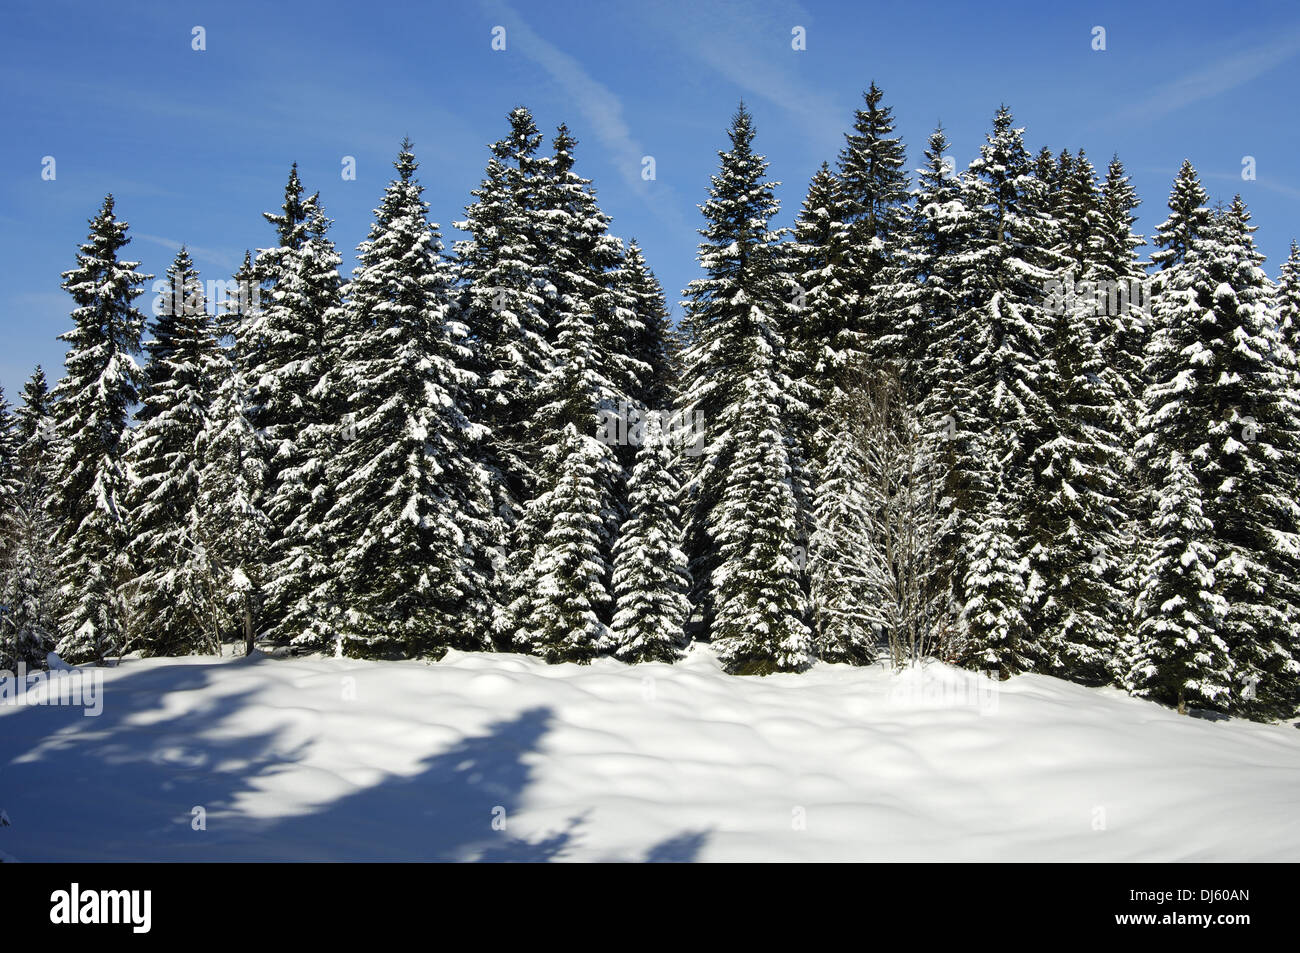 Winter forest Stock Photo